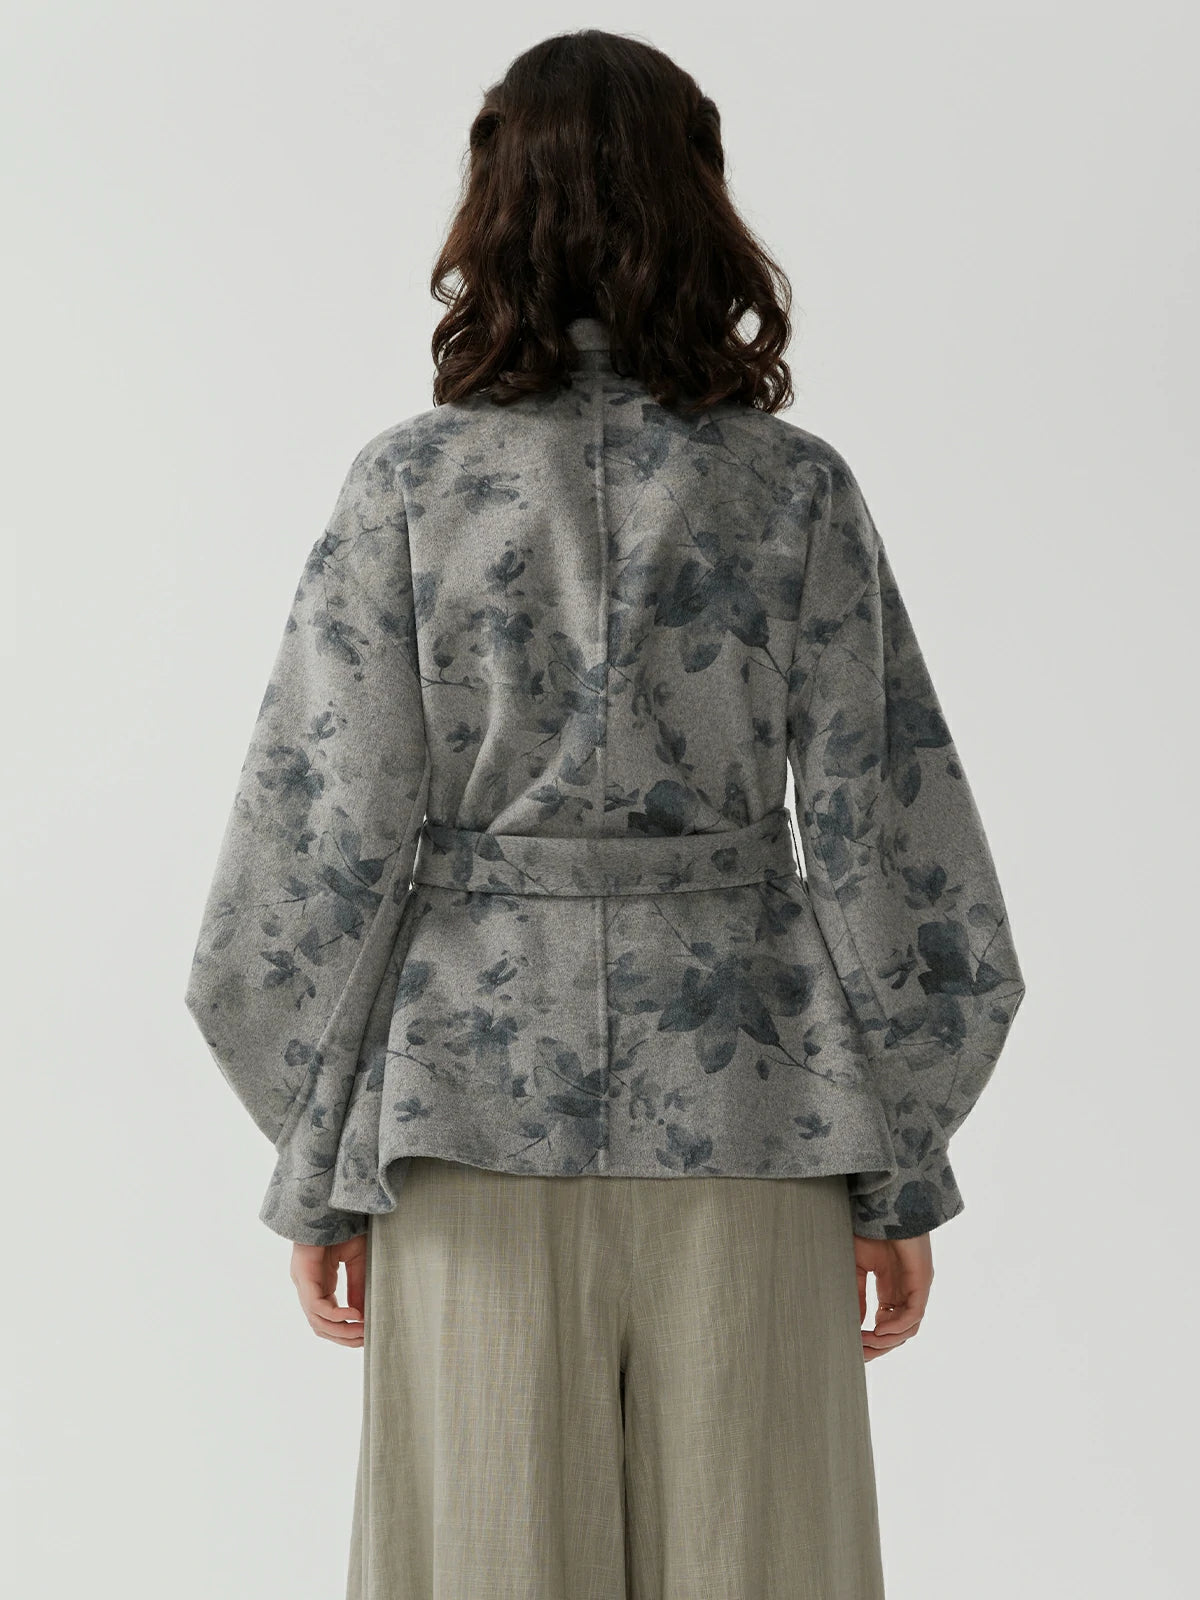 Collared jacket with accompanying belt, featuring grey printed pattern design and graceful fluid lines for a stylish look